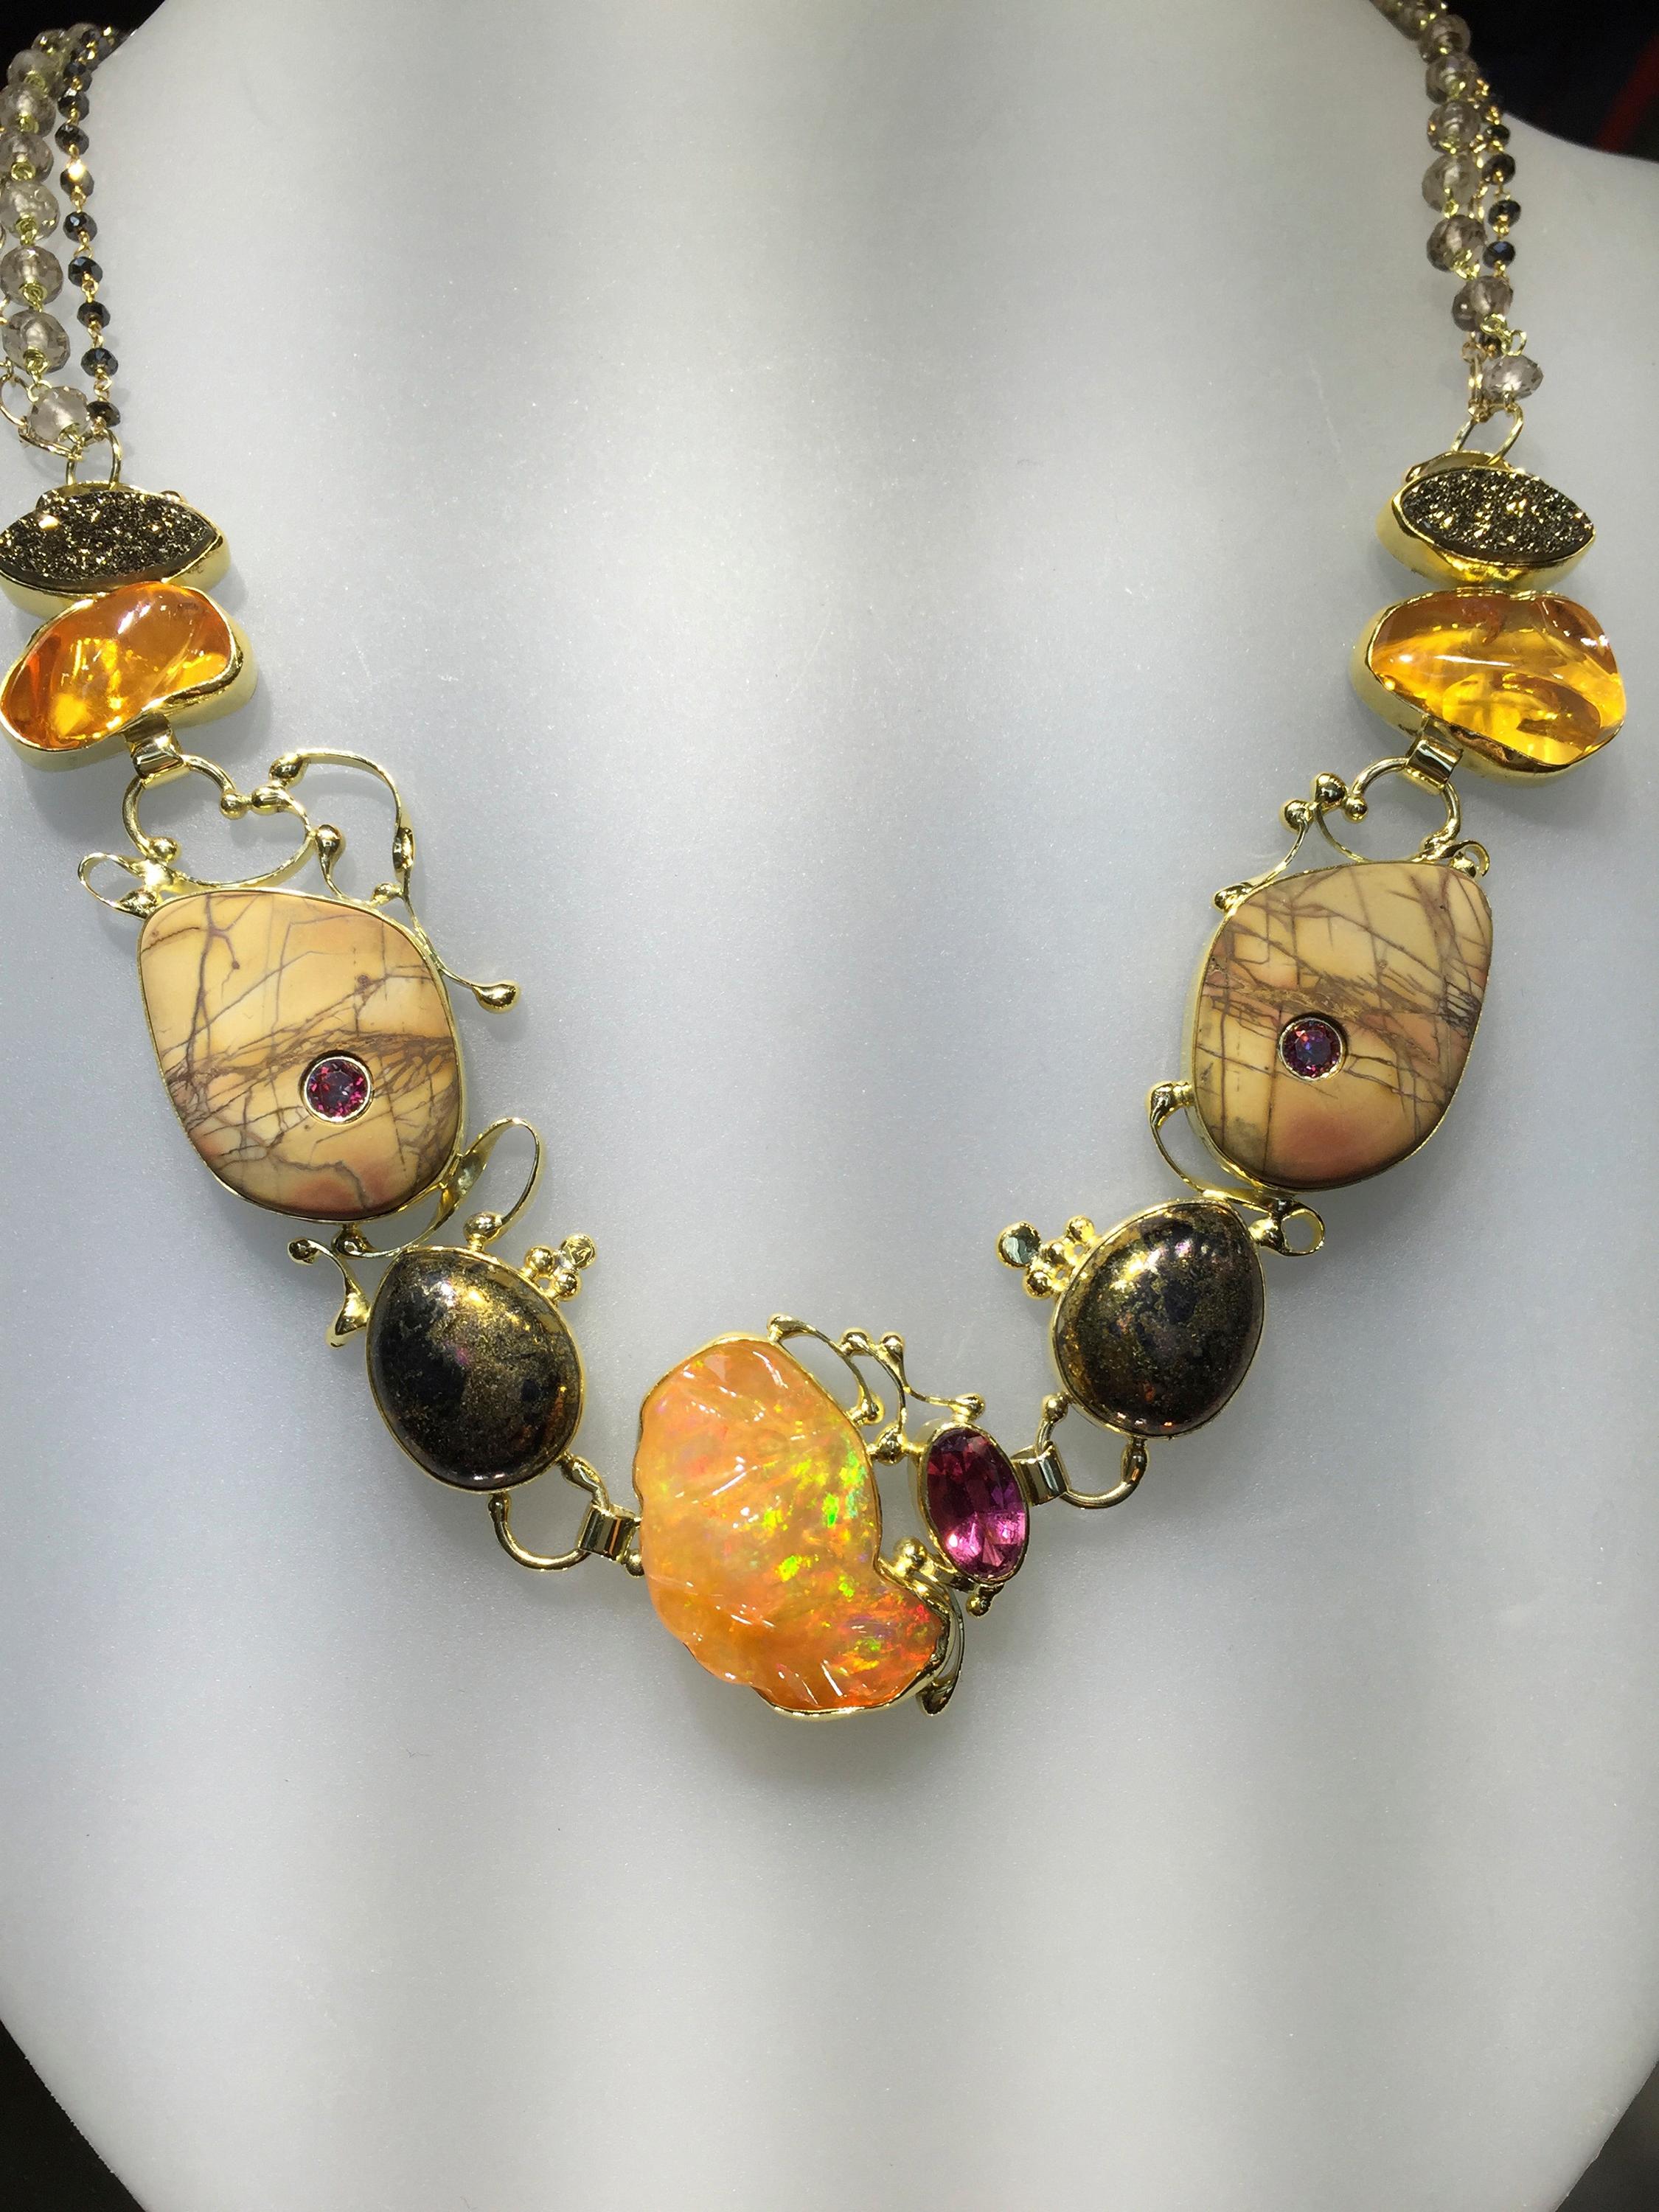 This Mexican opal necklace was such a delight to envision and fabricate. Exploring Mexico, Santa Fe, Yowah & Klimt's paintings with all it's rich colors and shapes led me to this color theme and design. After painting the woman and then